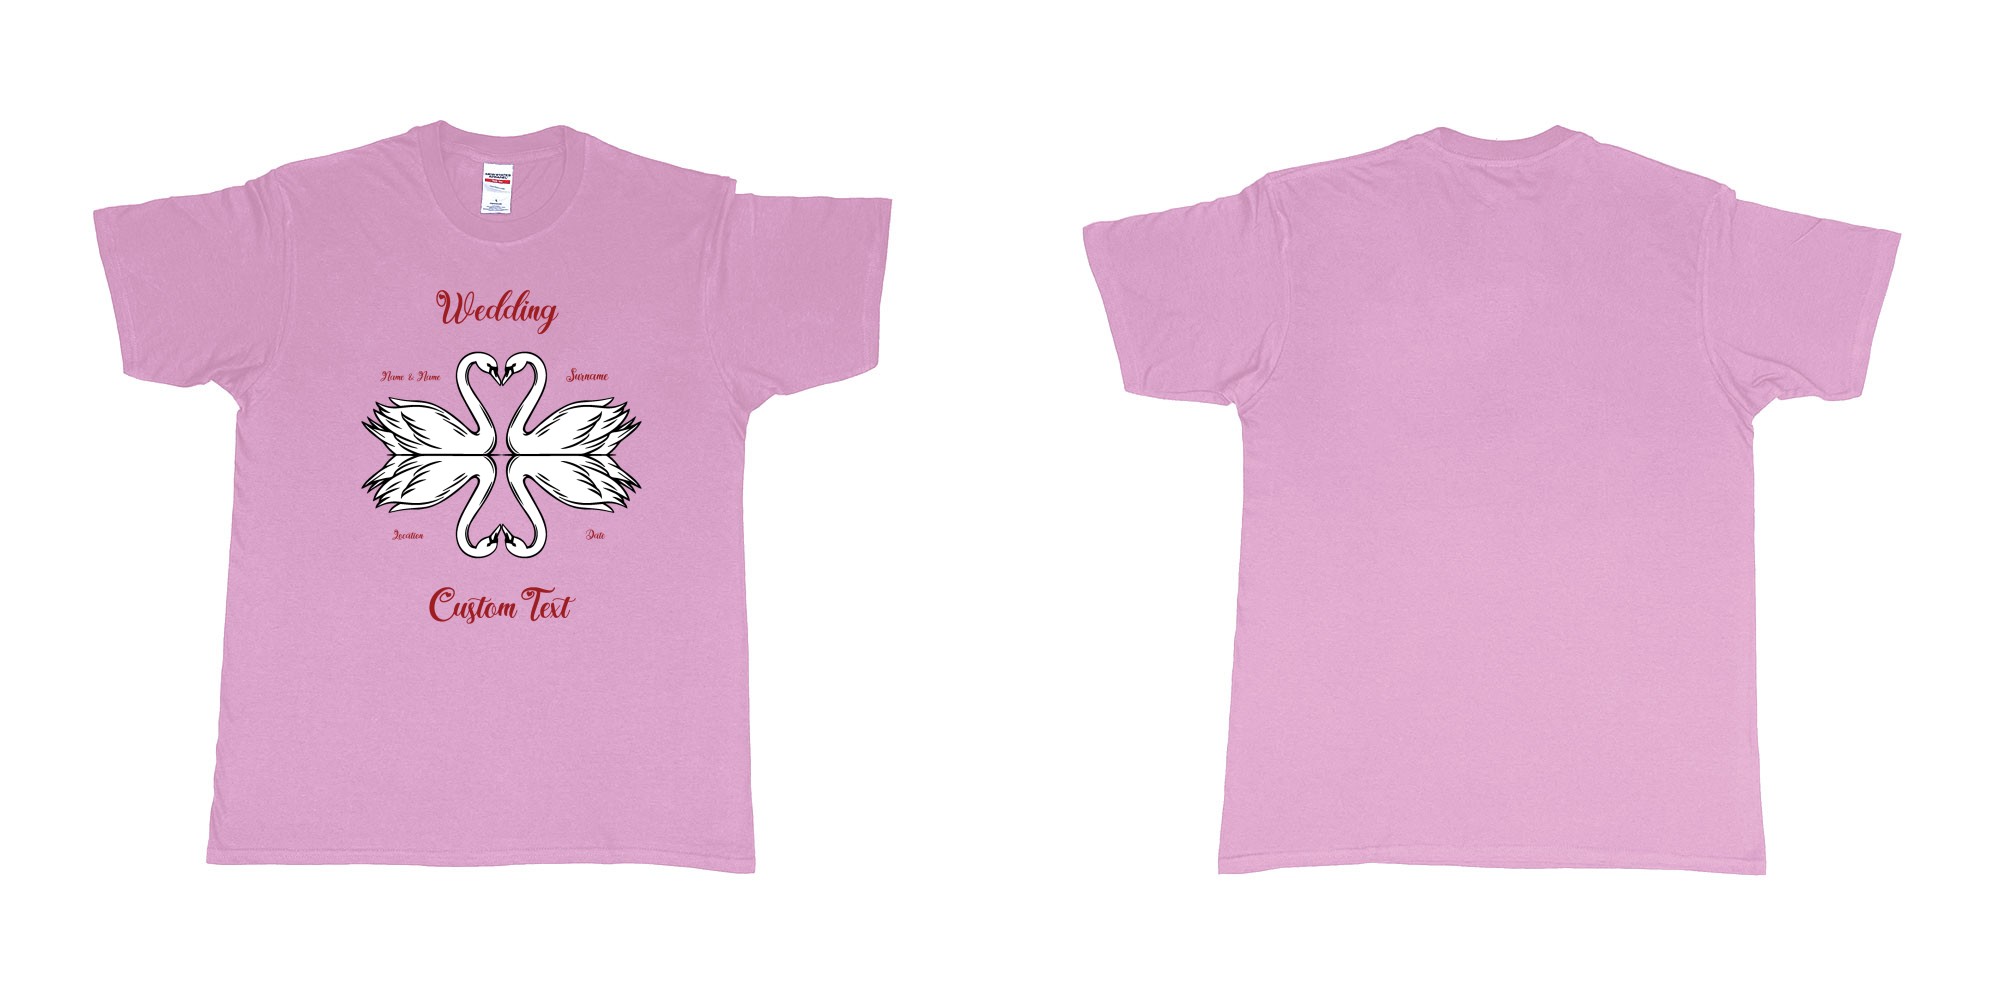 Custom tshirt design swans hearts reflection in fabric color light-pink choice your own text made in Bali by The Pirate Way